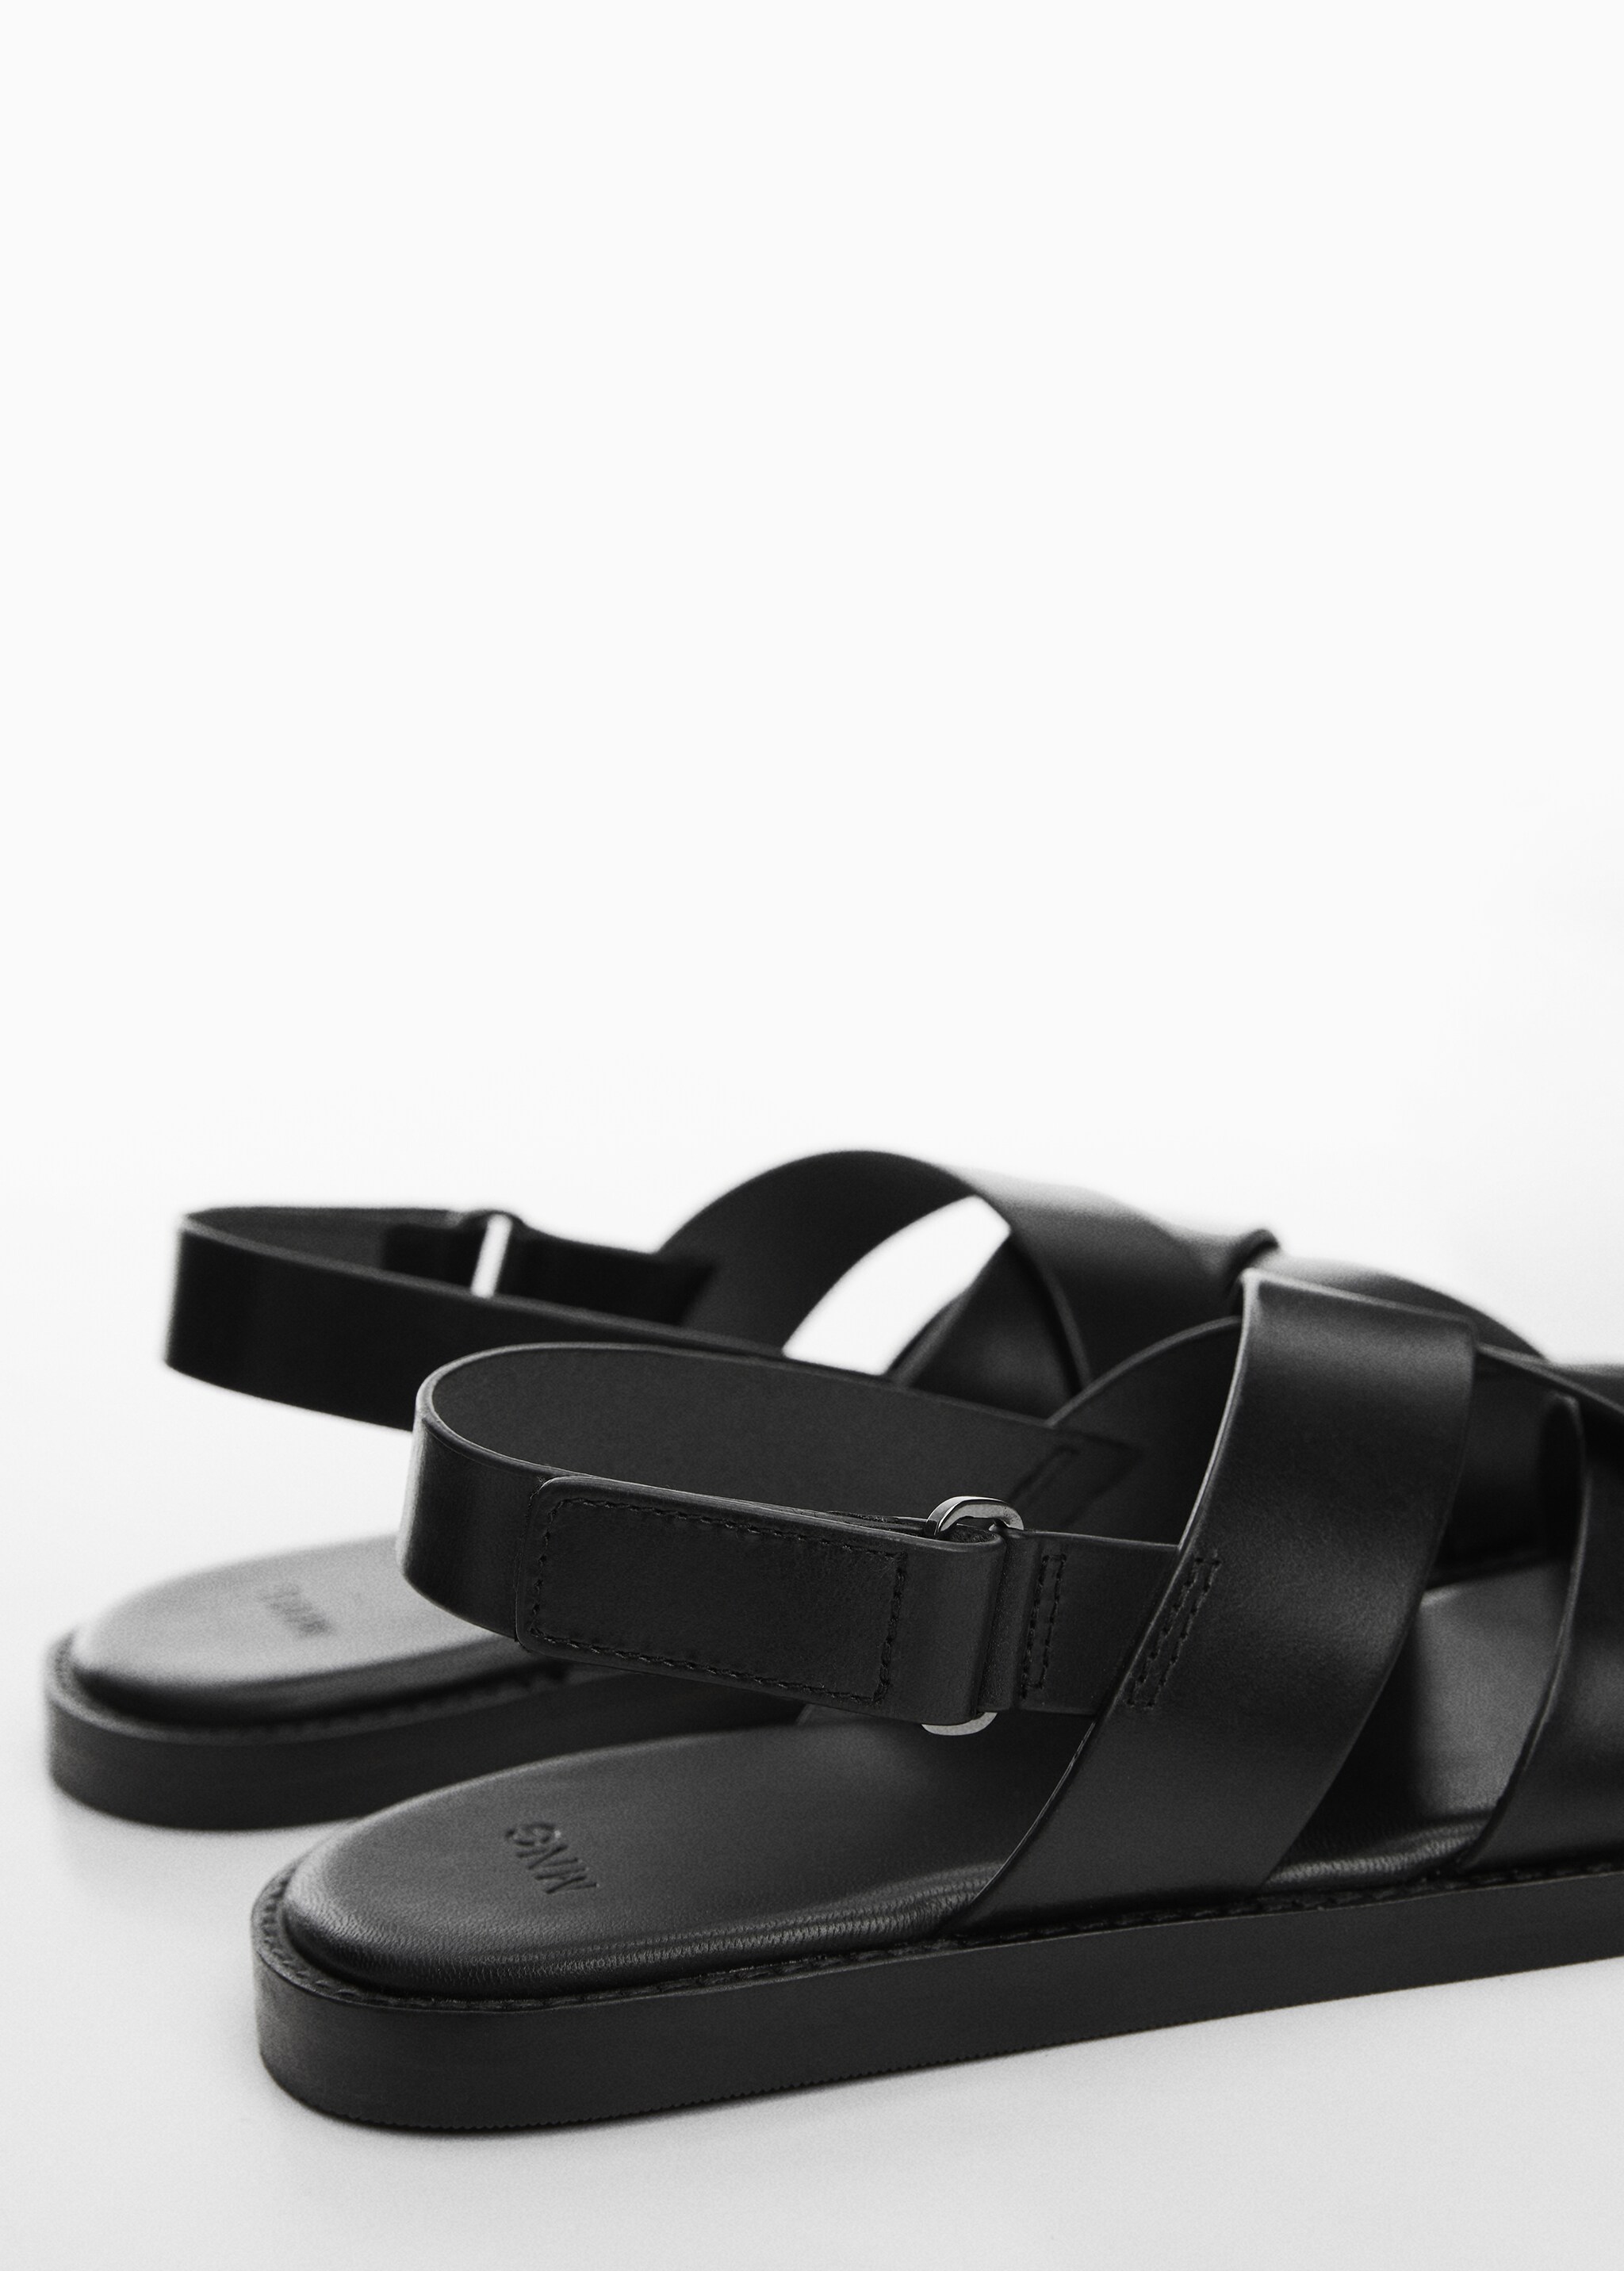 100% leather crossed strap sandal - Details of the article 1